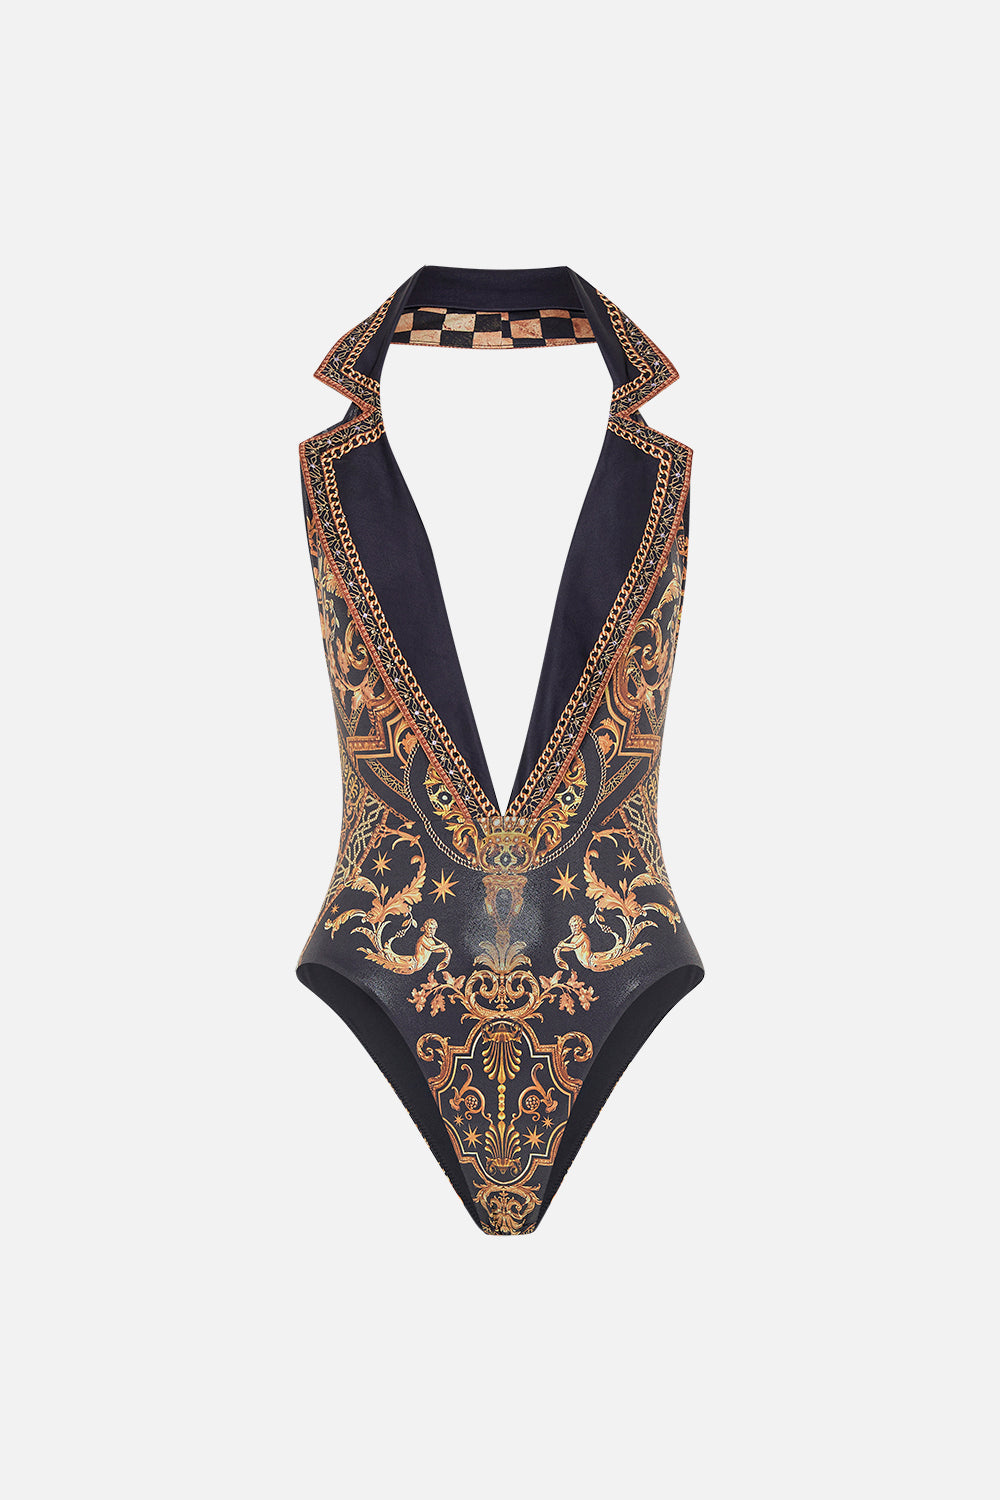 PLUNGE FRONT BODYSUIT WITH COLLAR DUOMO DYNASTY